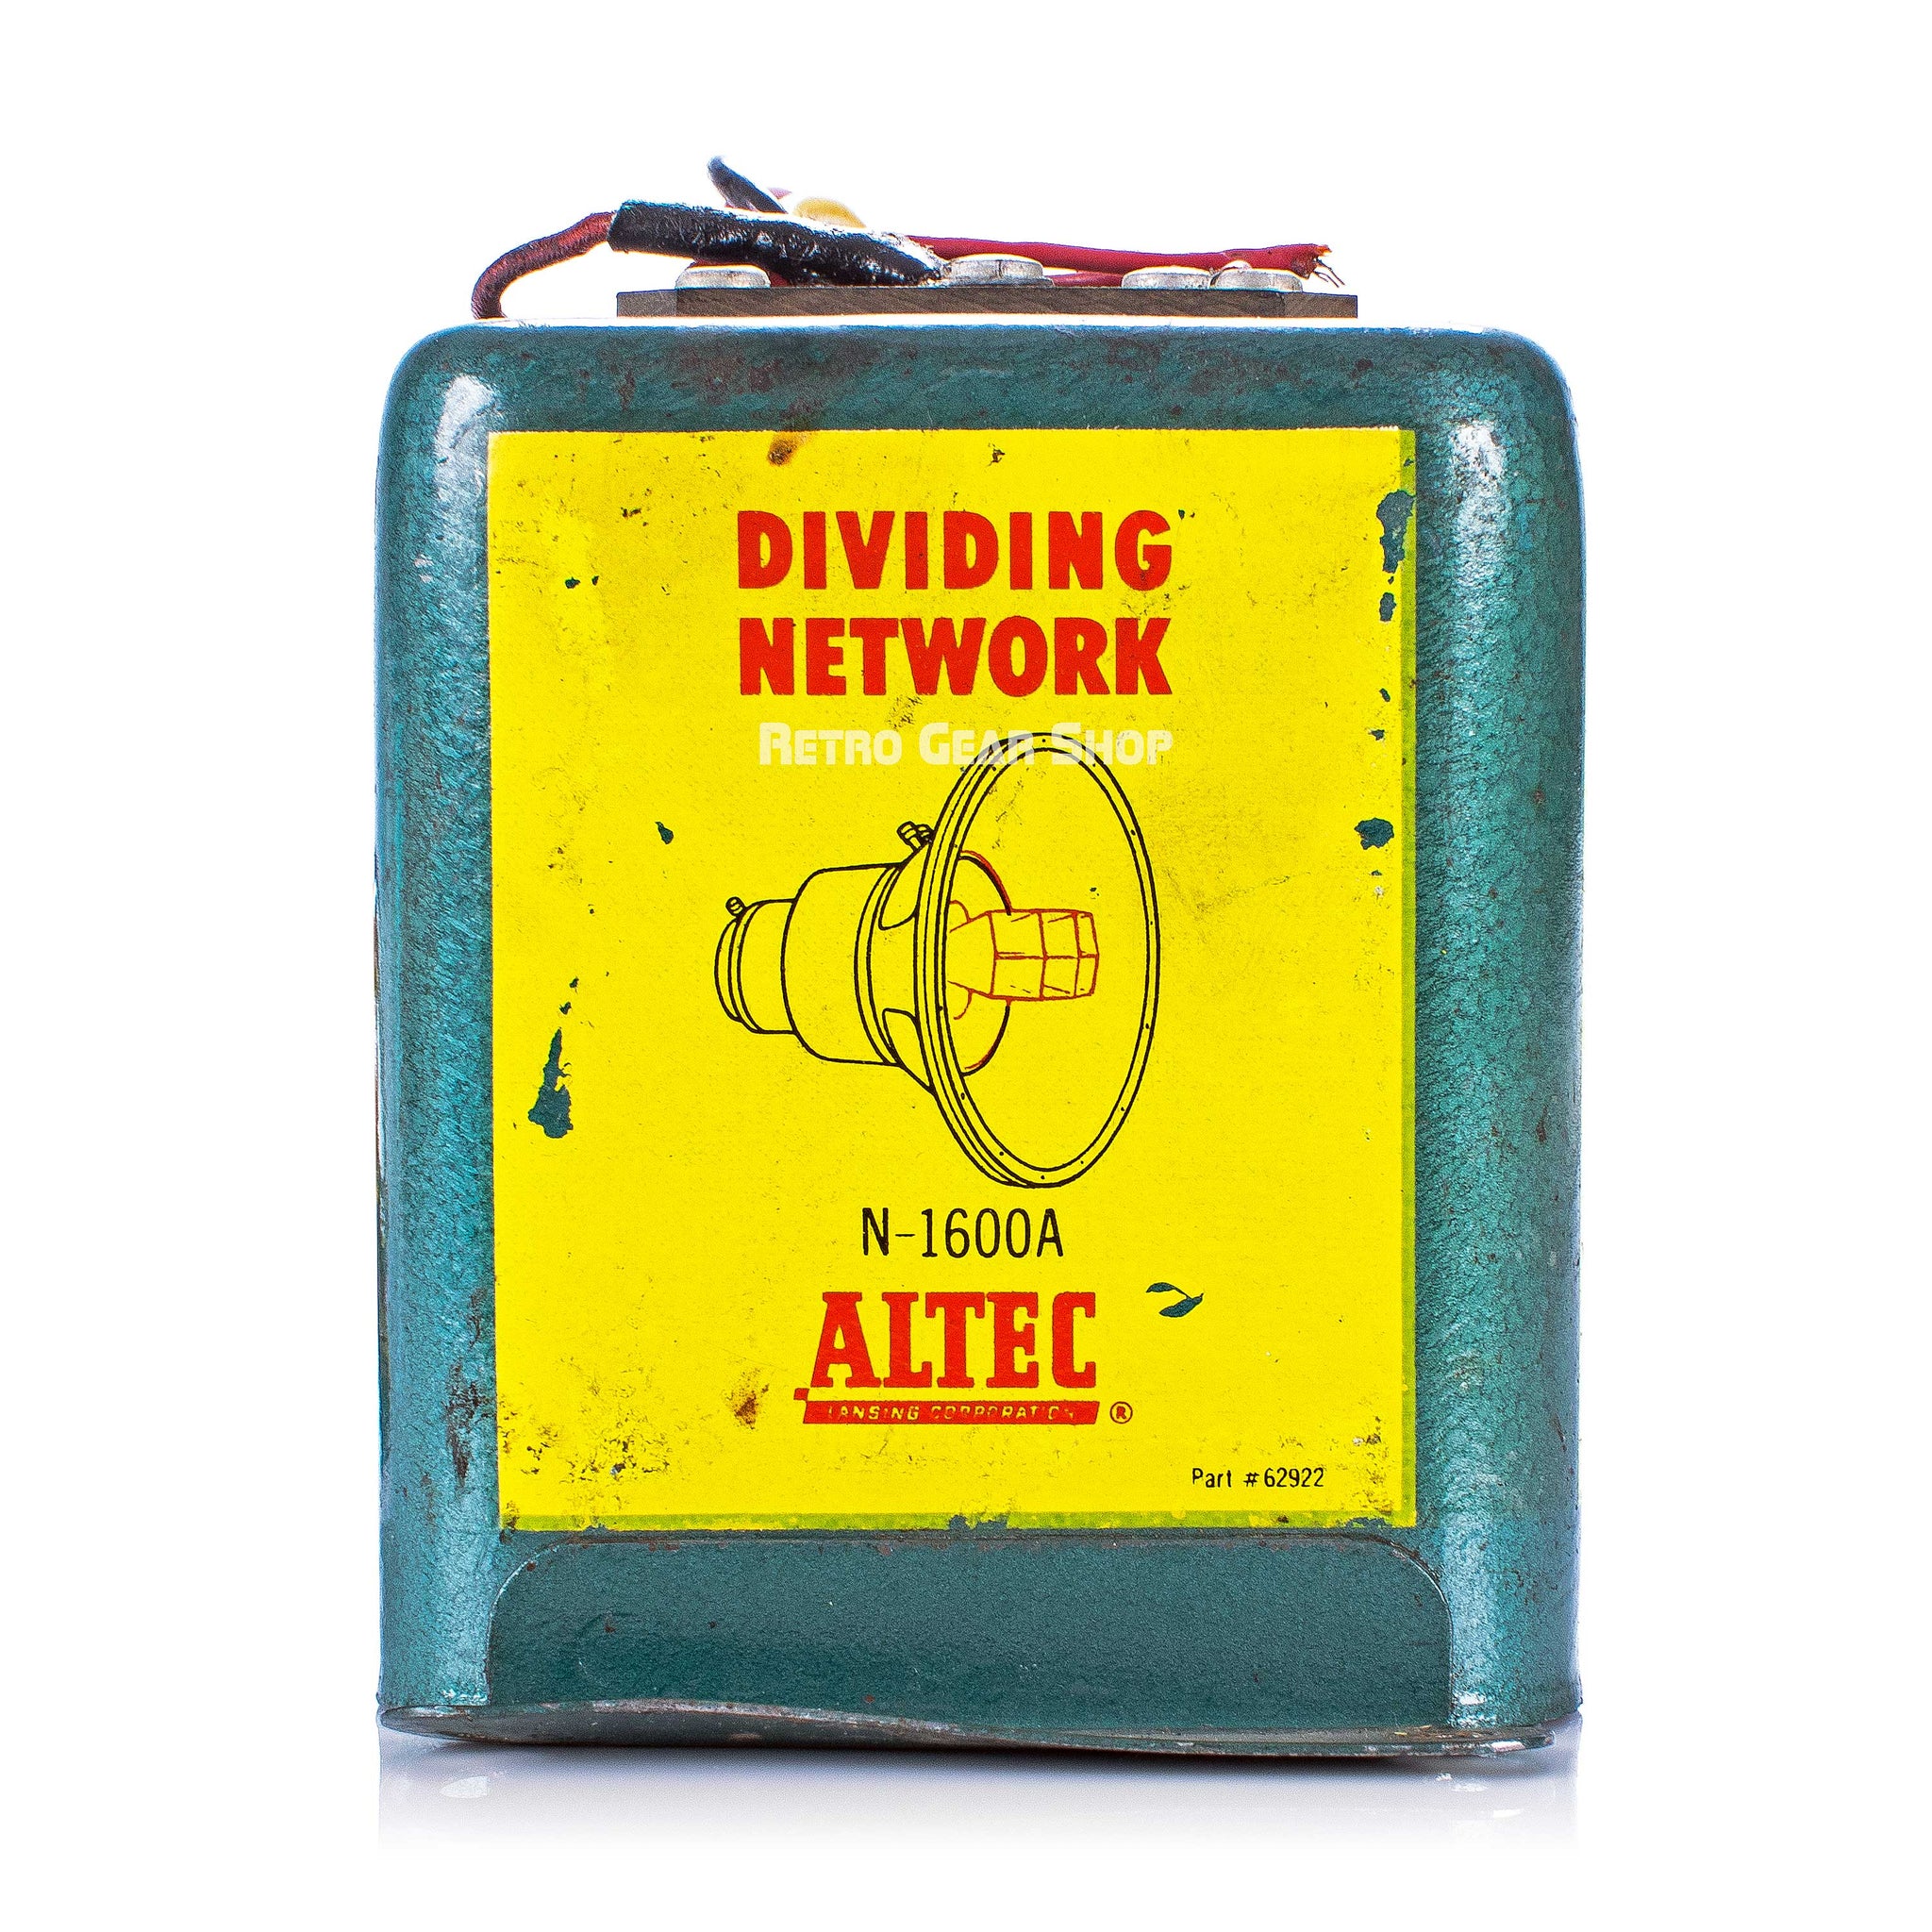 ALTEC N-1600-D 8or16 network-